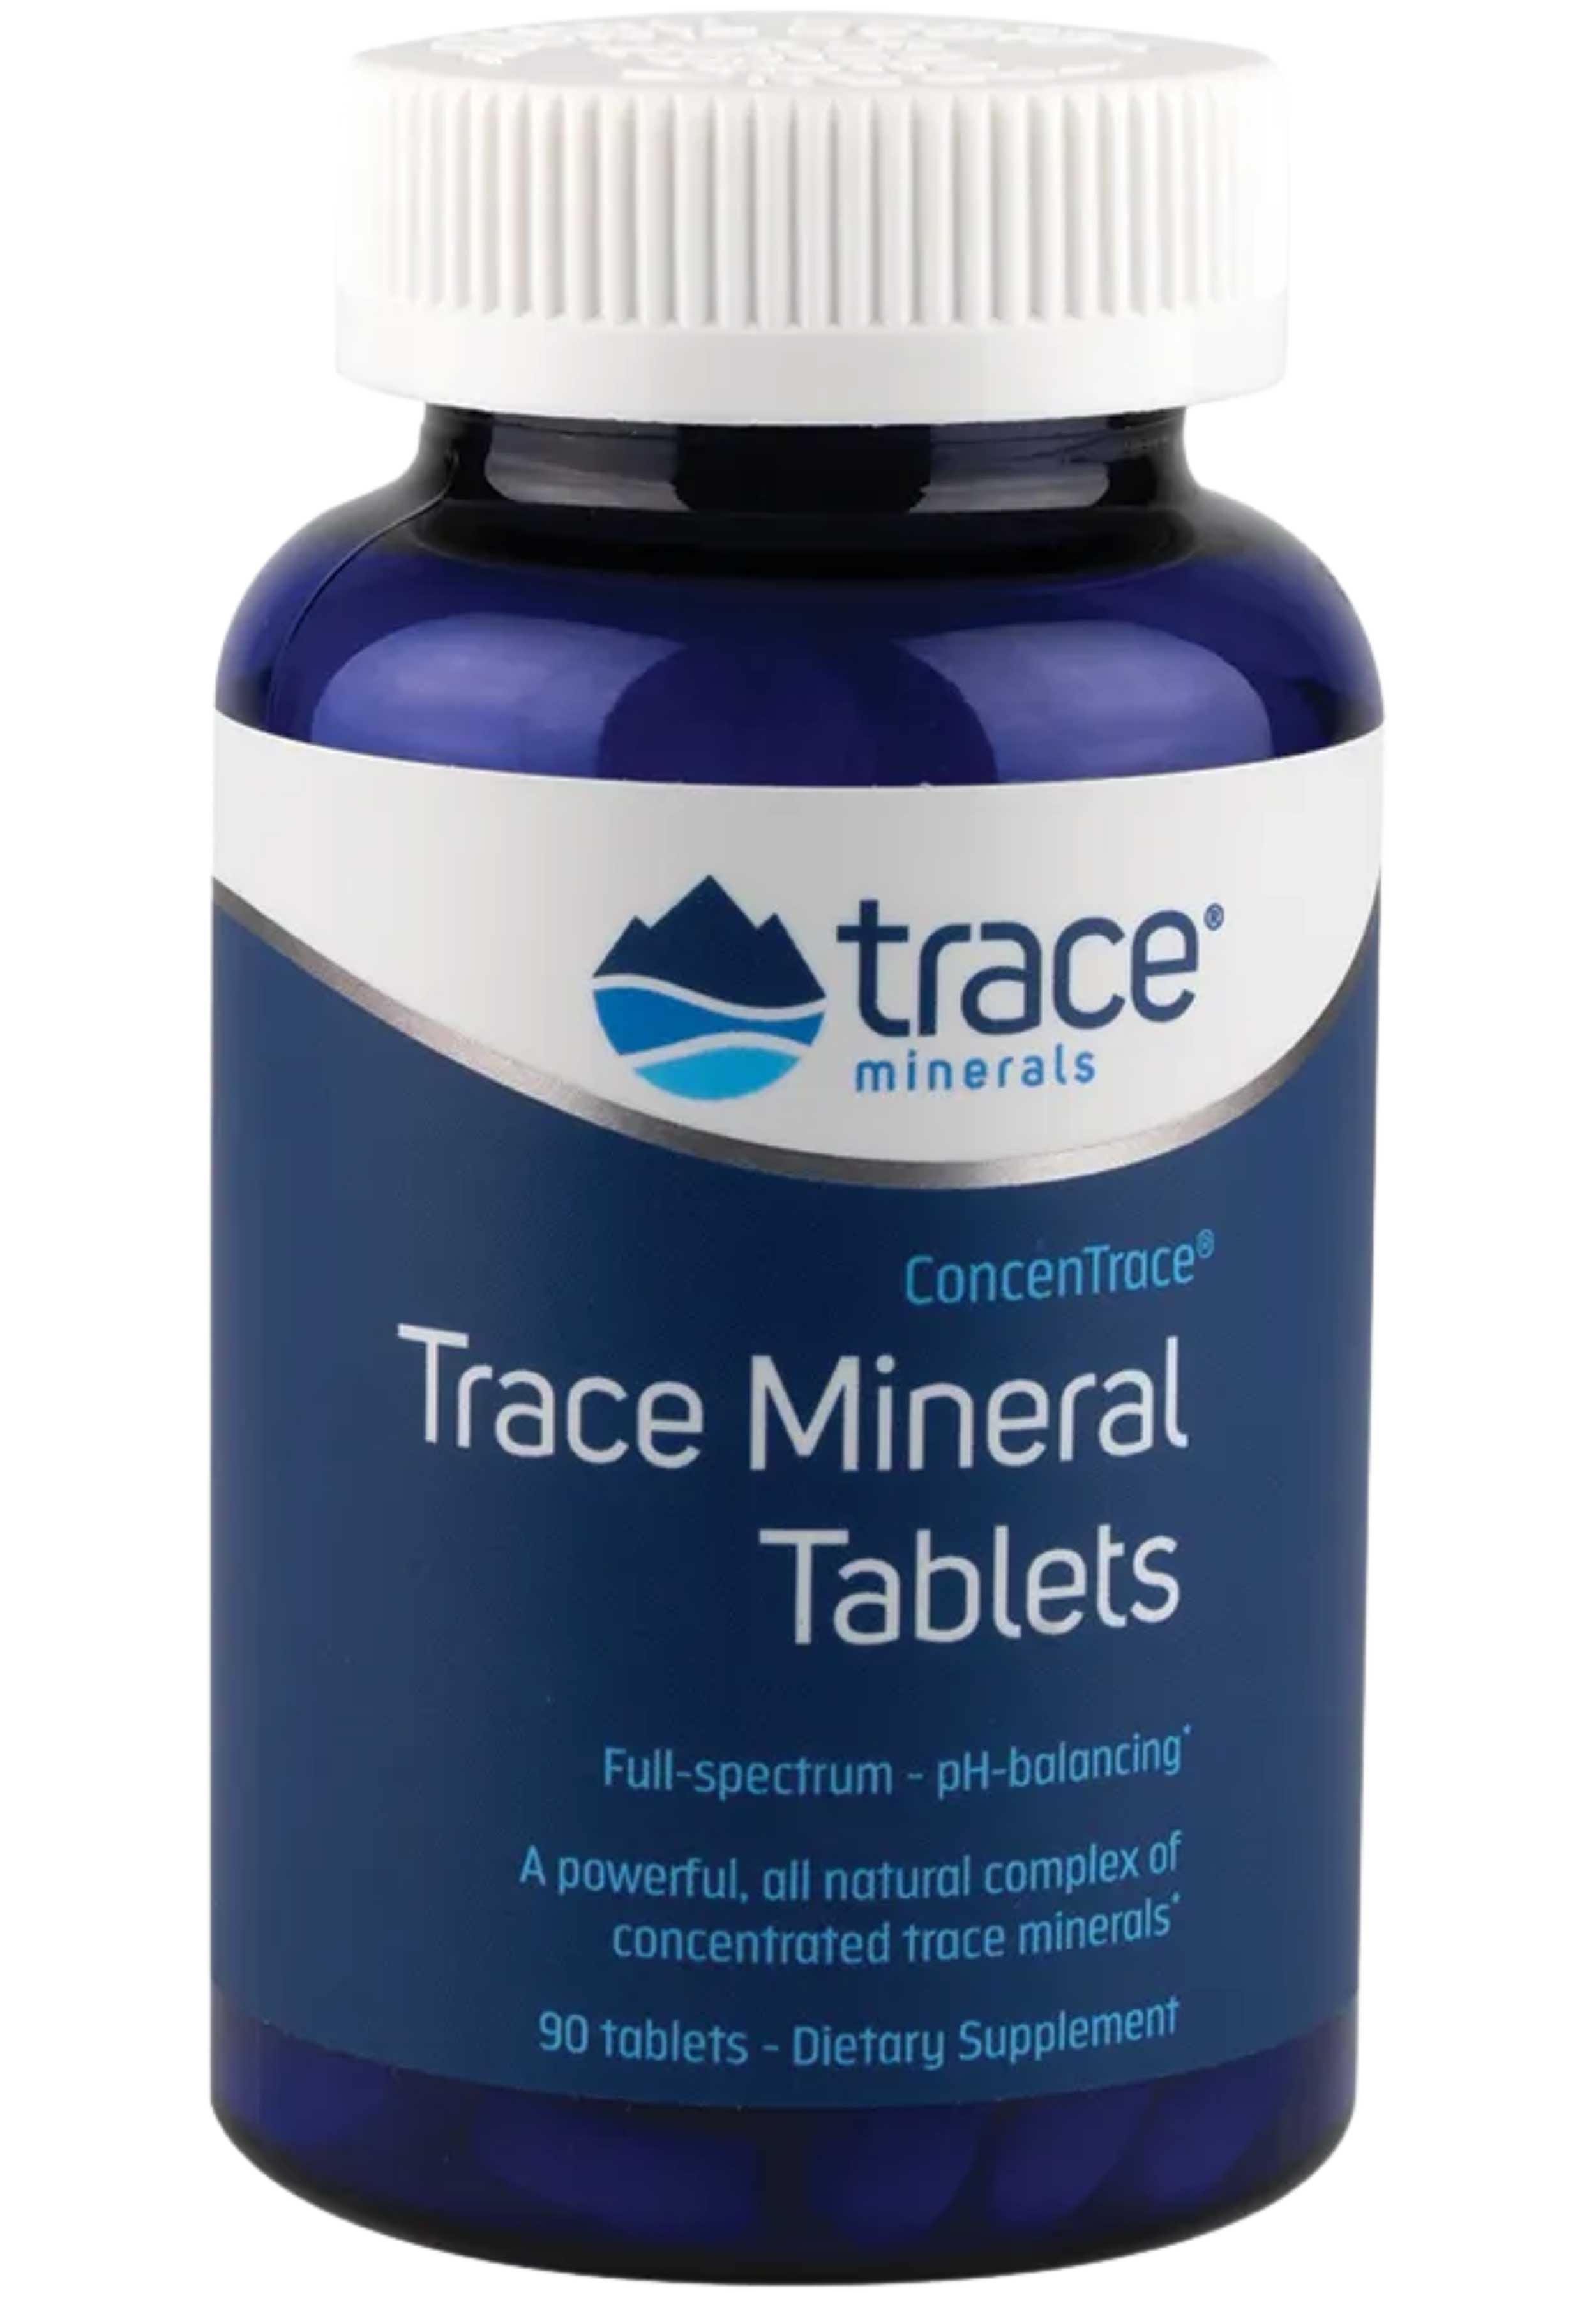 Trace Minerals Research Concentrace Trace Mineral Tablets